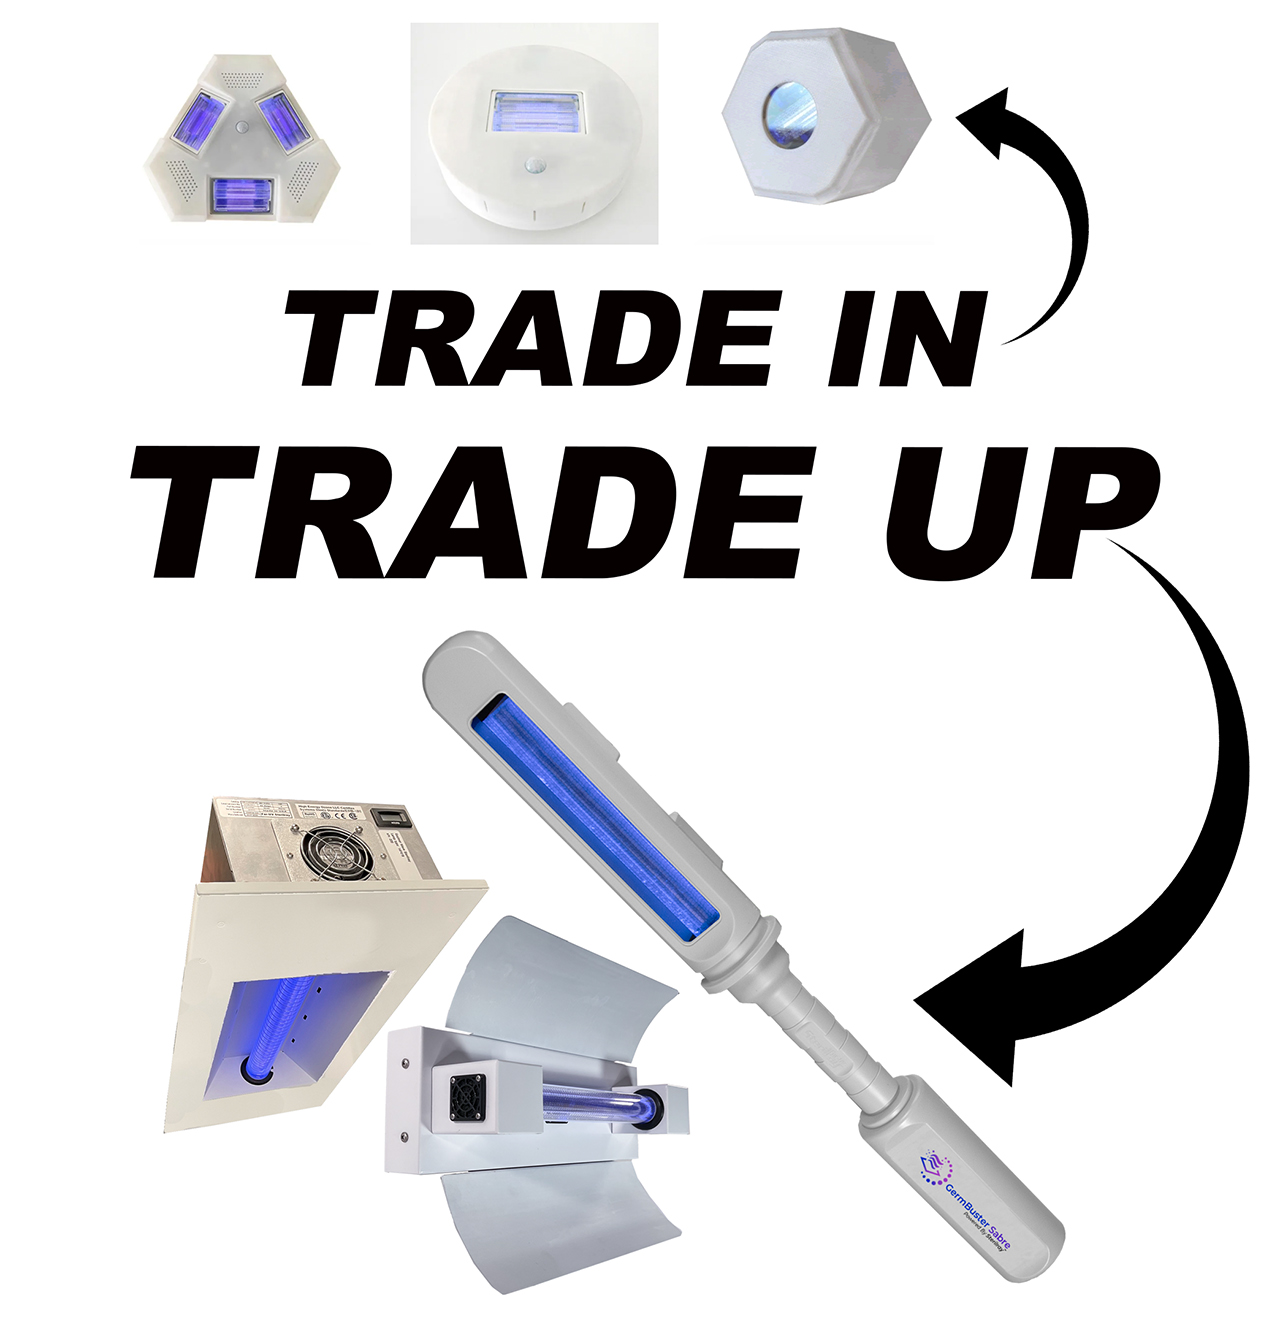 Trade In Trade Up Graphic